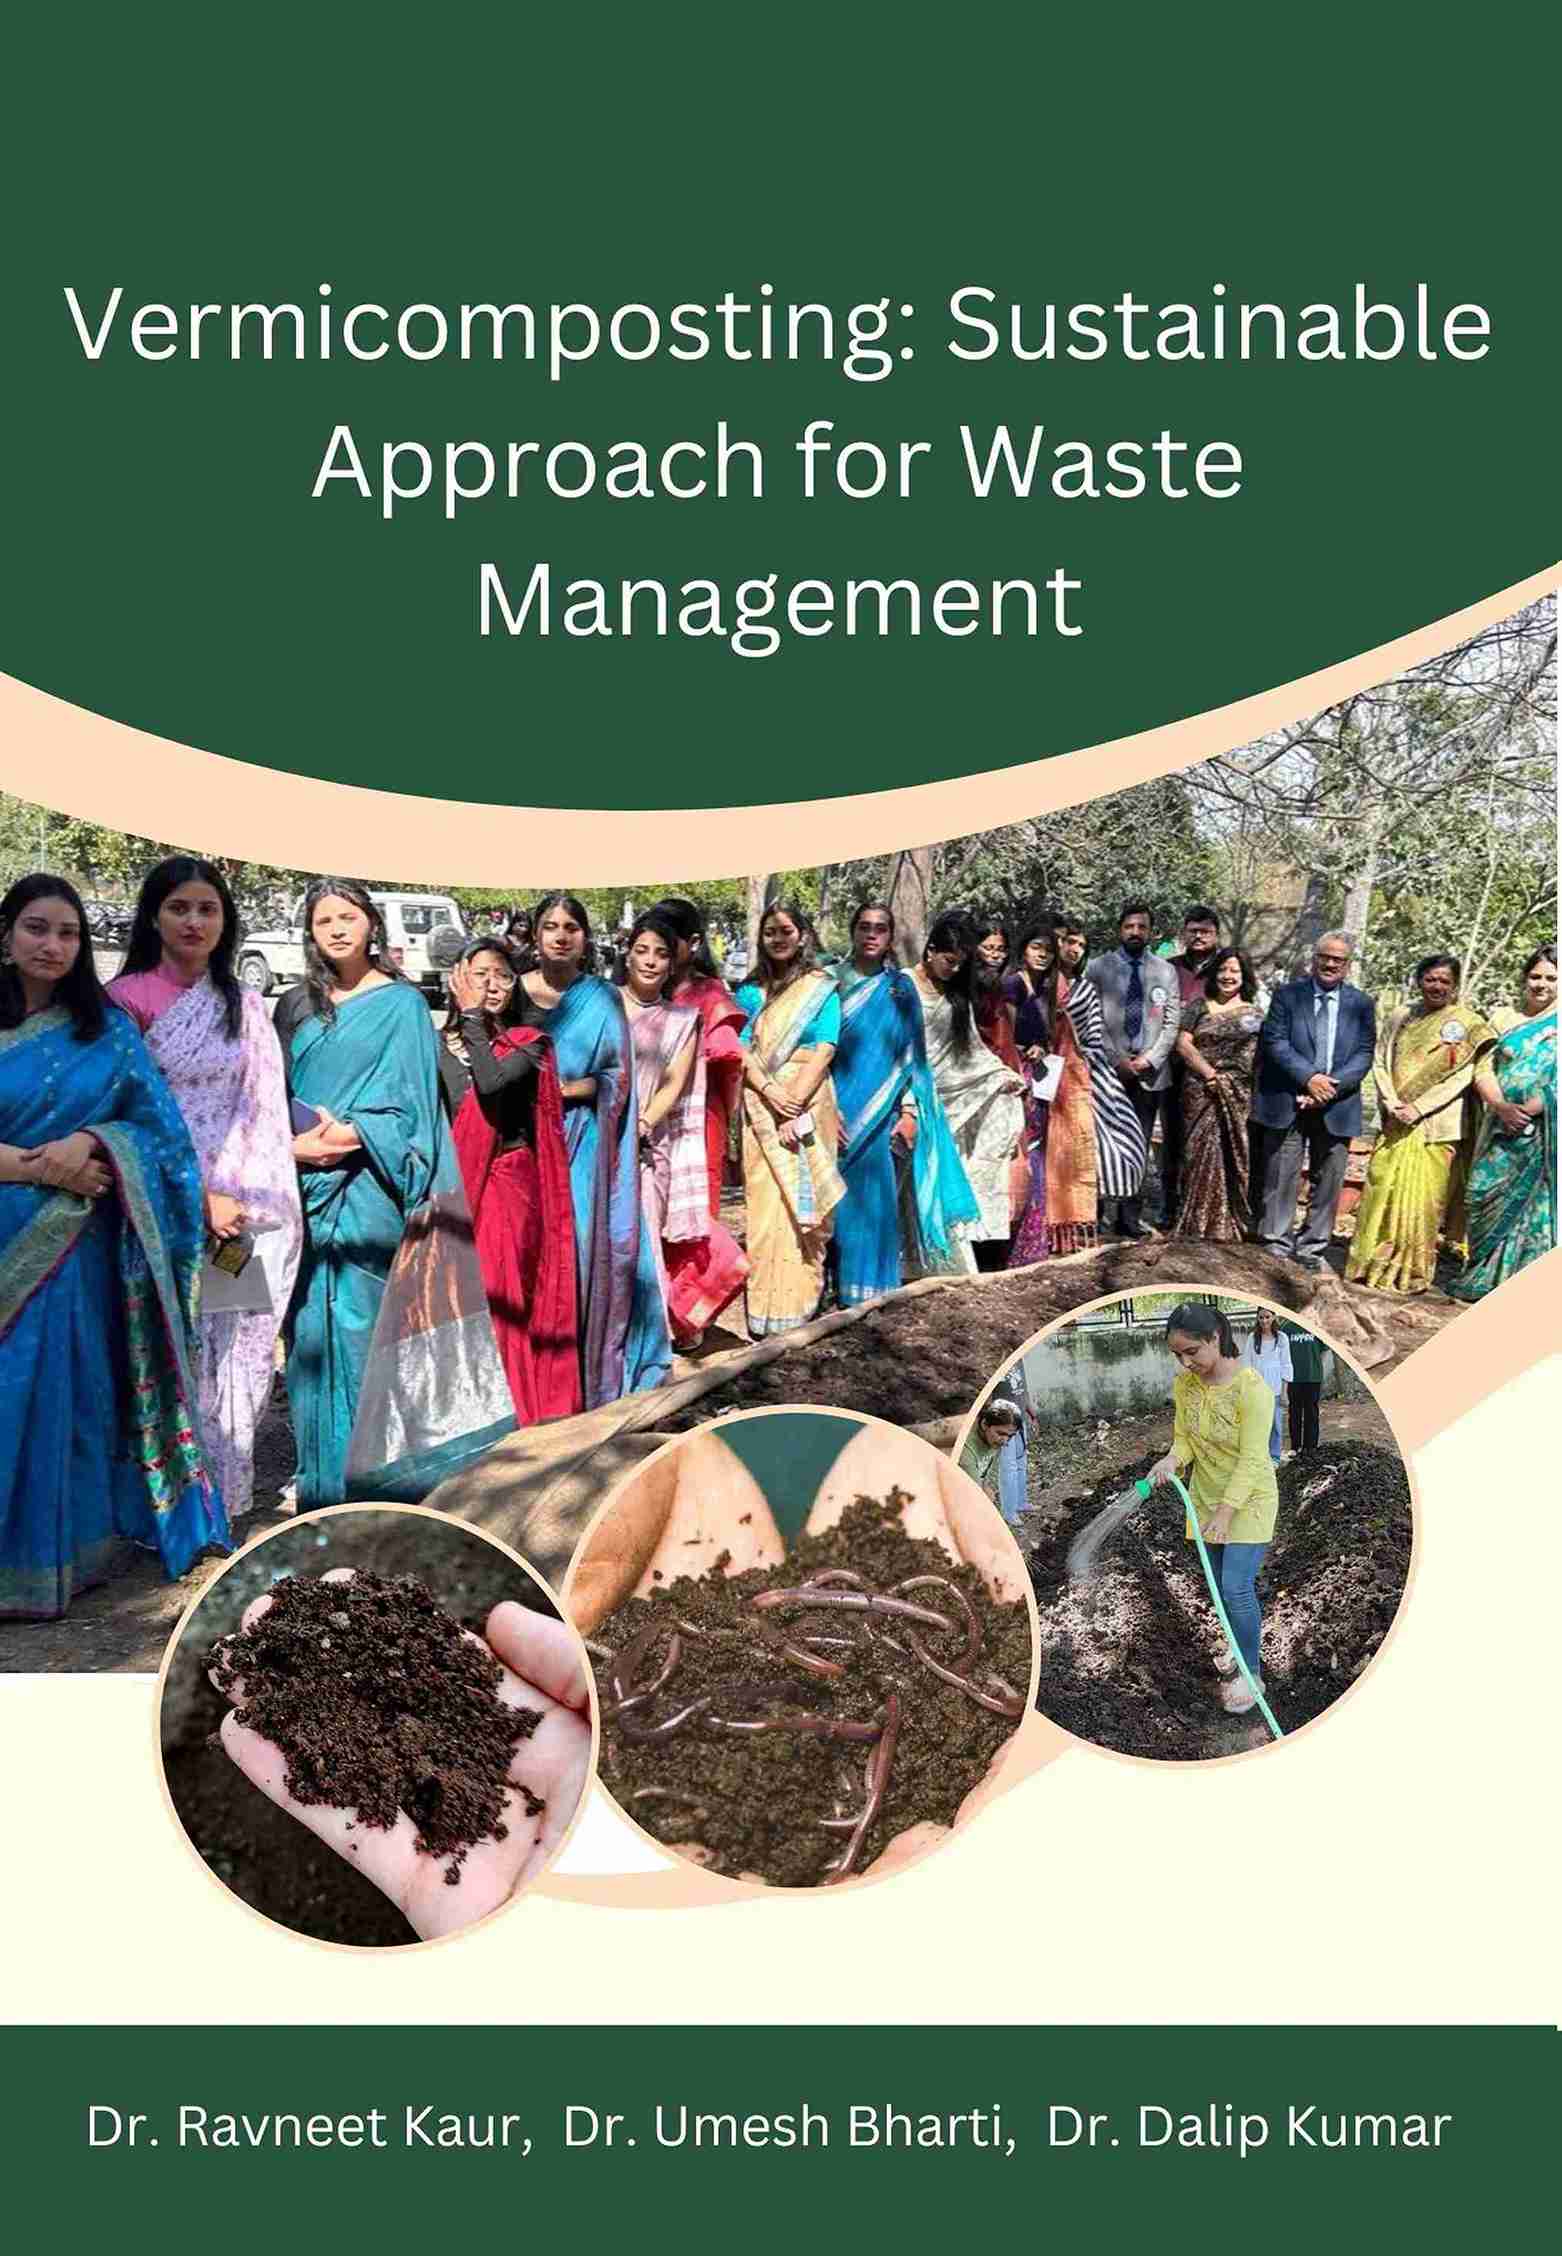 VERMICOMPOSTING: SUSTAINABLE APPROACH FOR WASTE MANAGEMENT